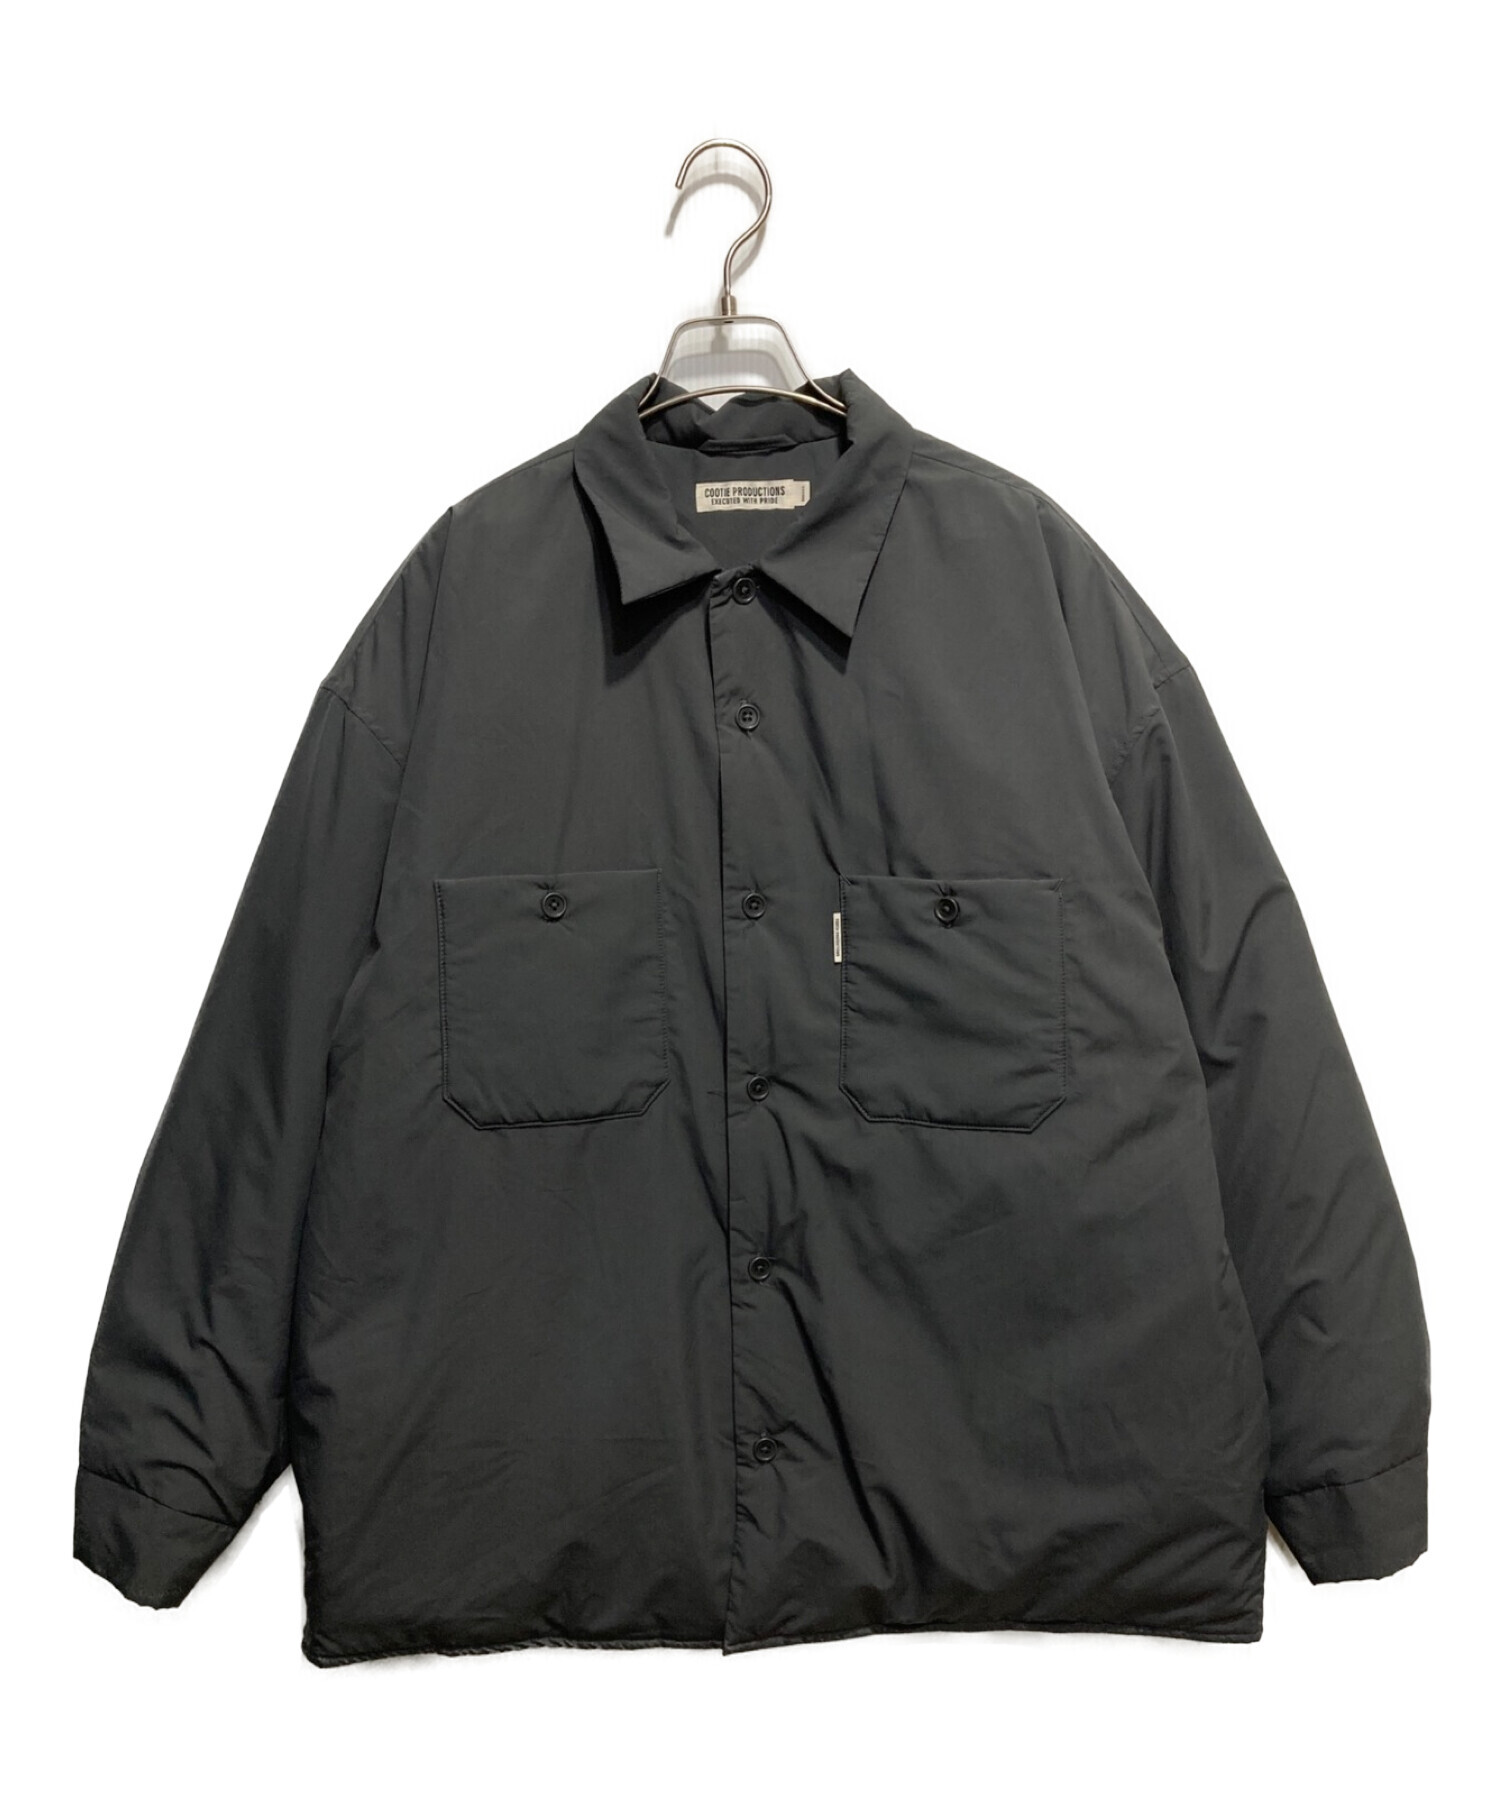 COOTIE PRODUCTIONS (クーティープロダクツ) Padded Error Fit Work Shirt Jacket グレー サイズ:S